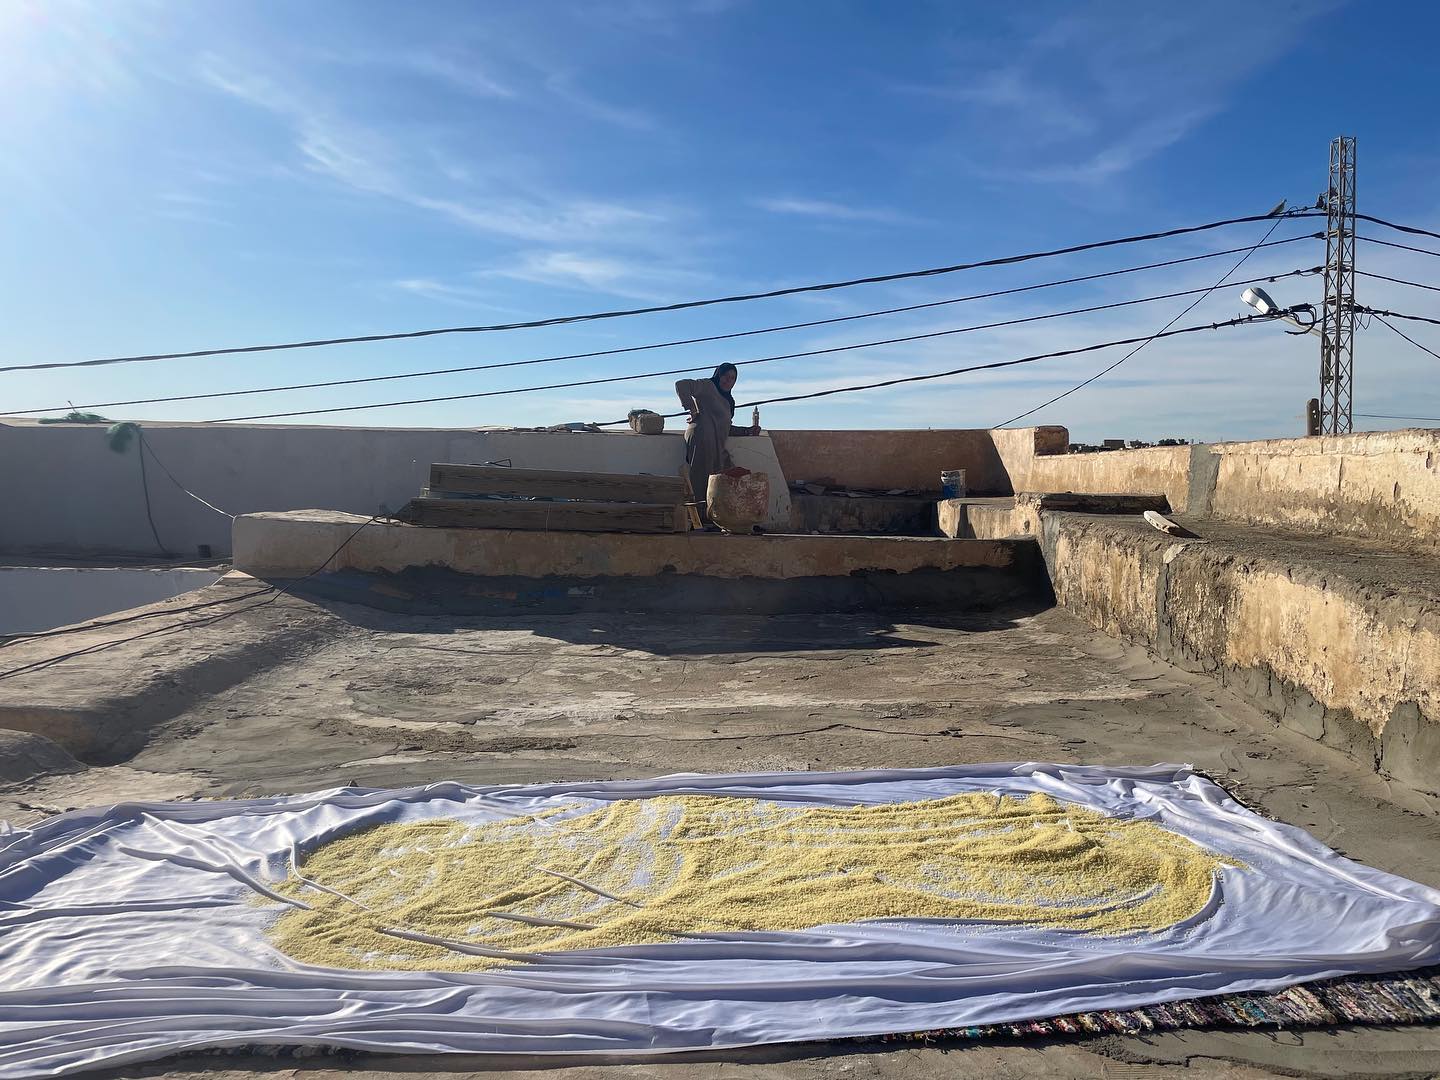 Couscous being dried on a rooftop in Nefta. Photo: Cooking Sunshine.